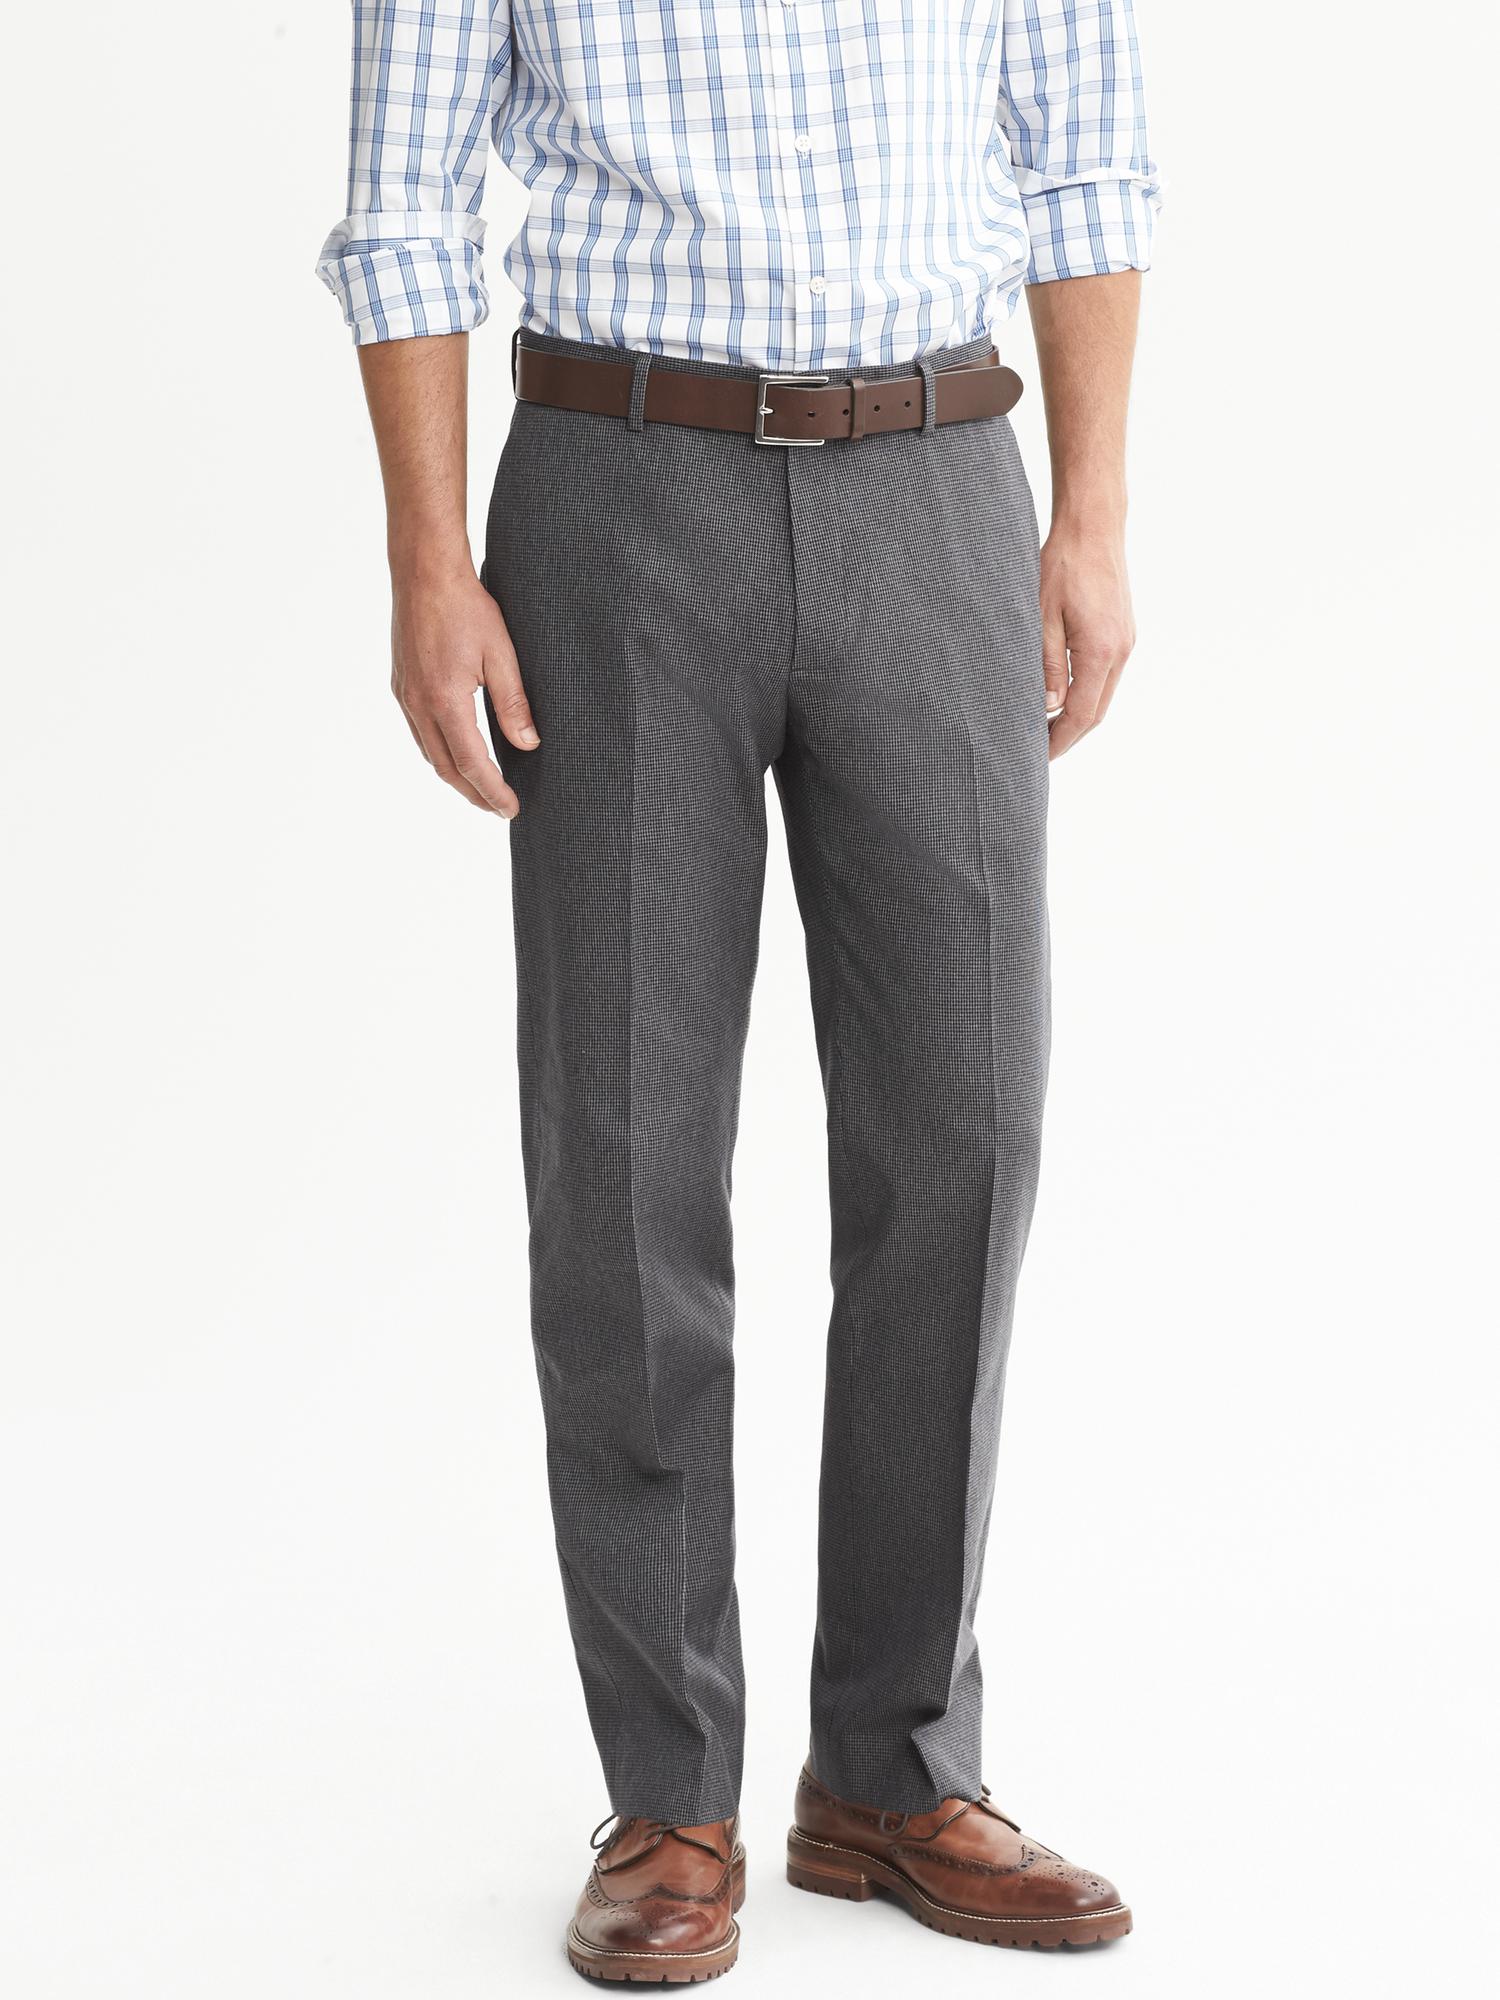 Tailored Slim-Fit Non-Iron Houndstooth Pant